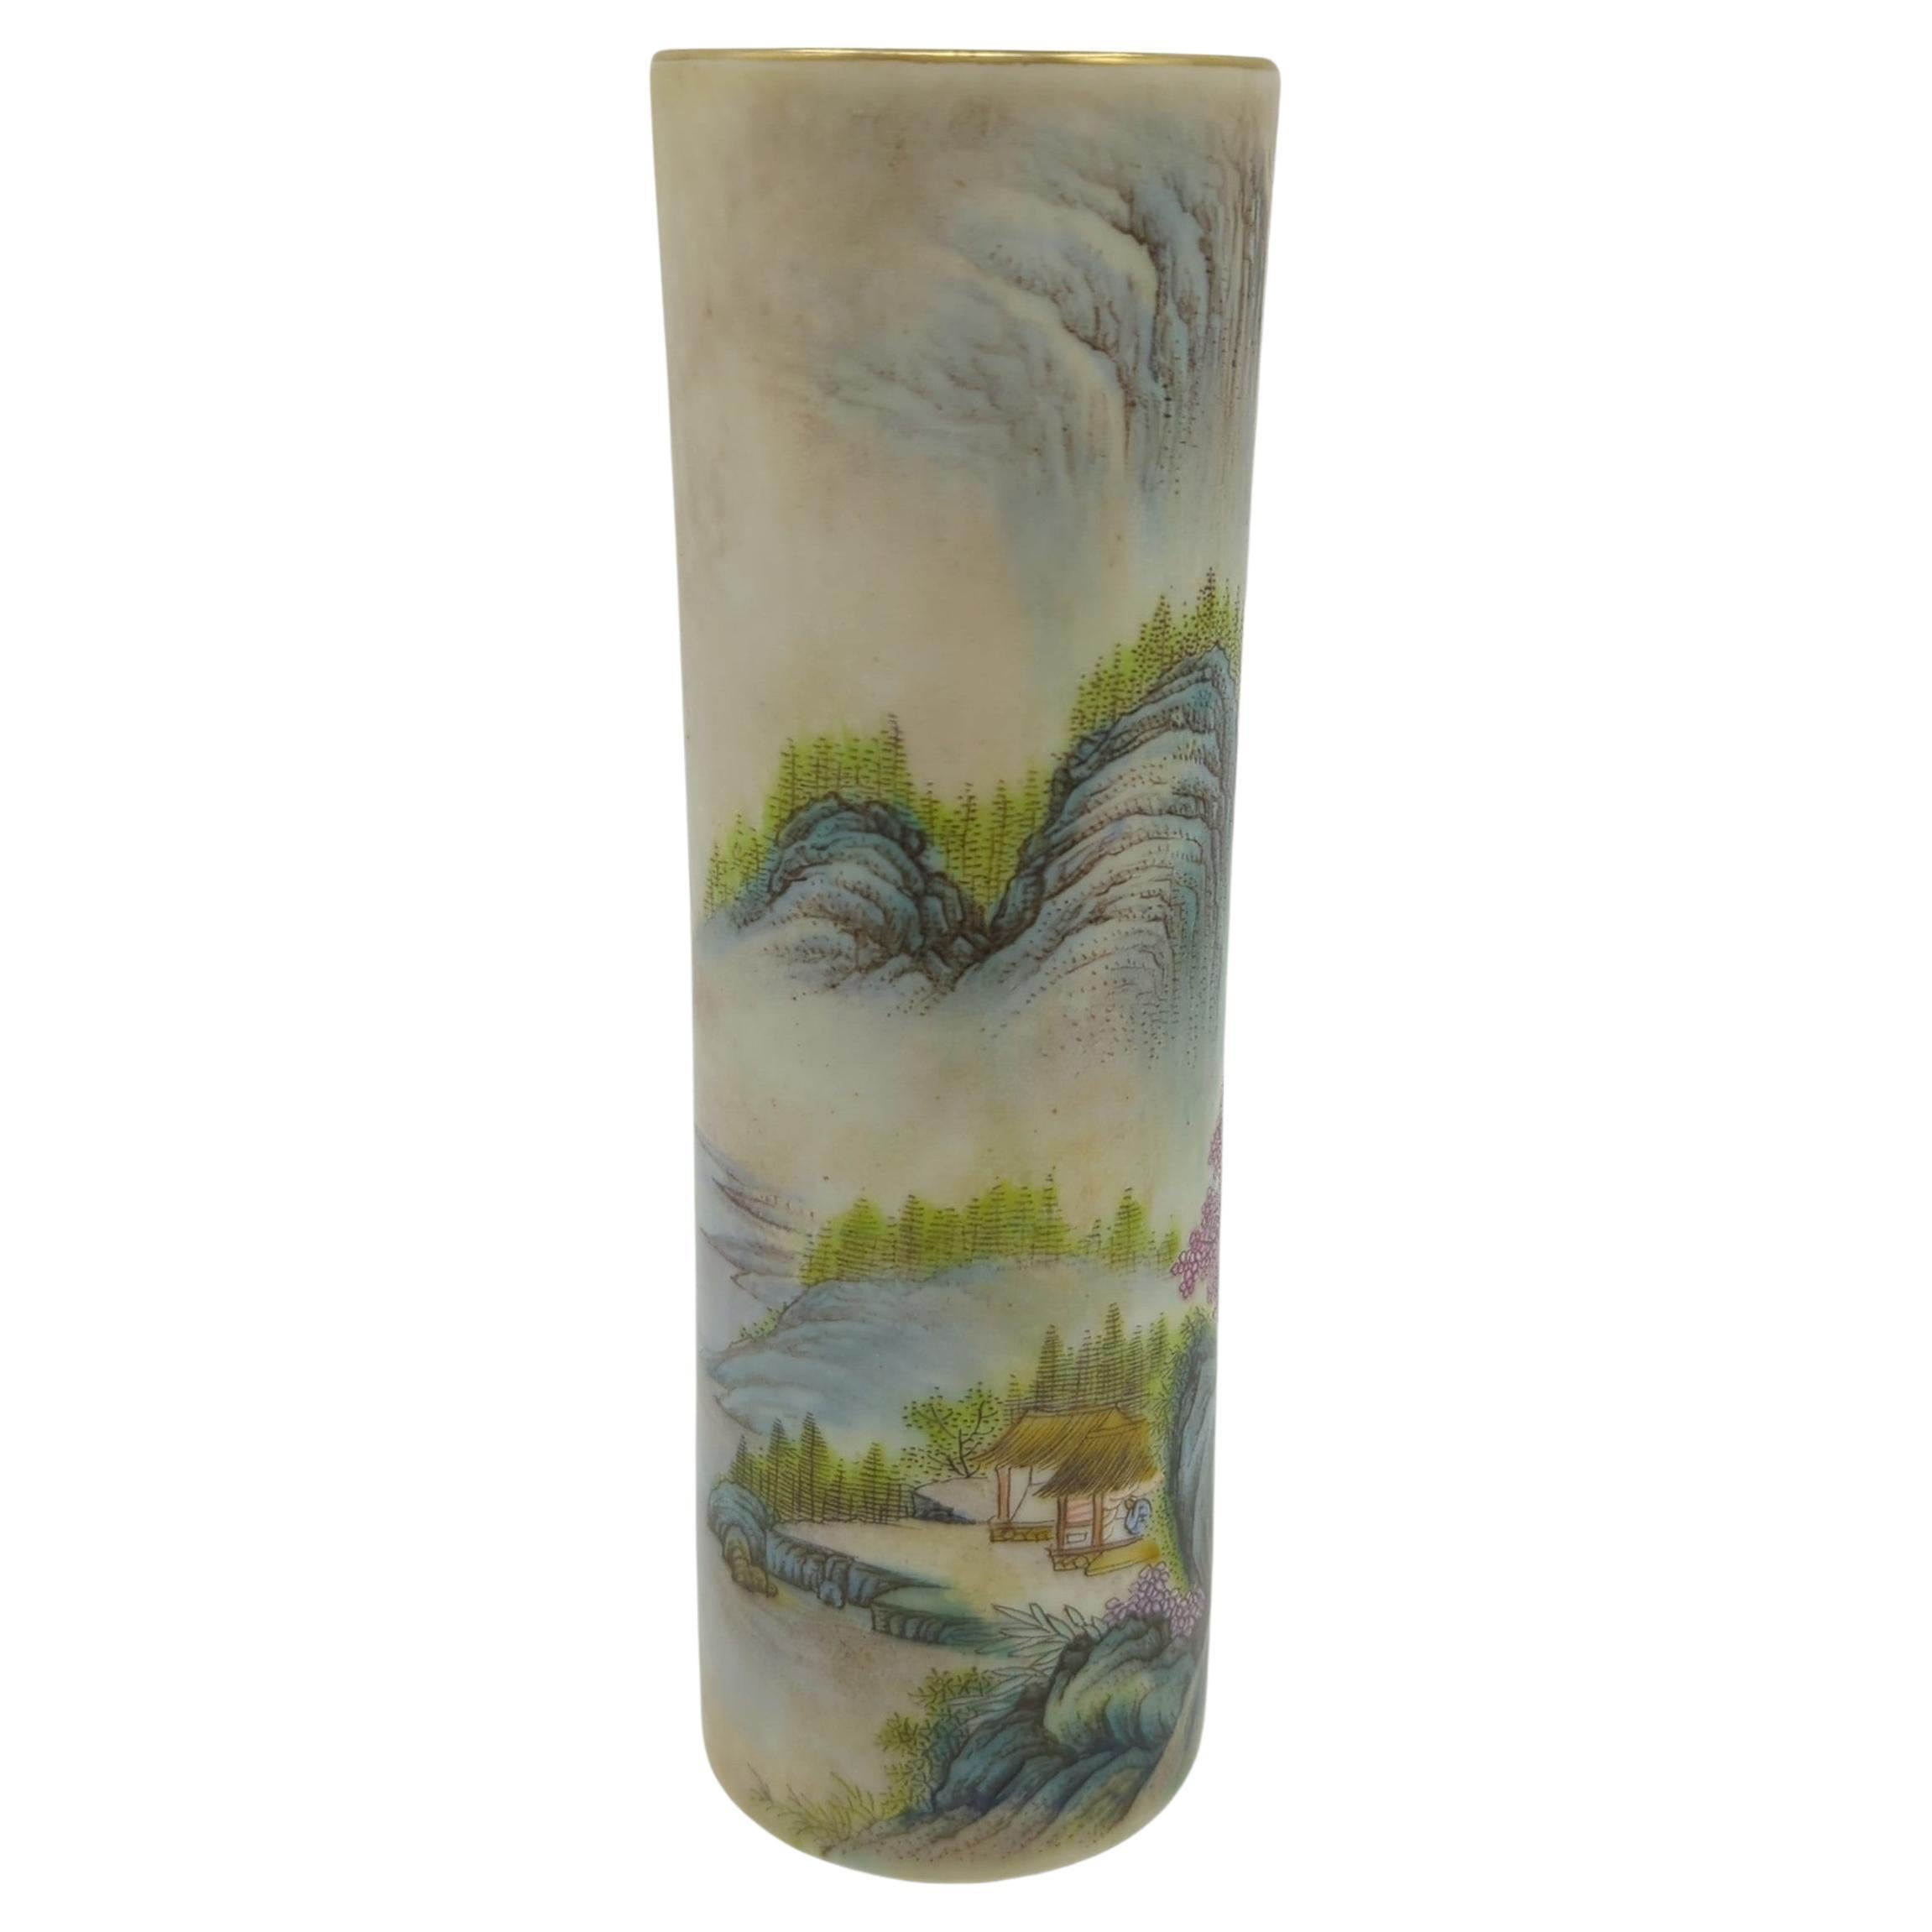 This exceptional cylindrical vase is a masterwork of Chinese ceramic artistry, rendered in the delicate and vibrant palette of Famille Rose Fencai enamels. The piece is a visual narrative, featuring a meticulously painted continuous scene of